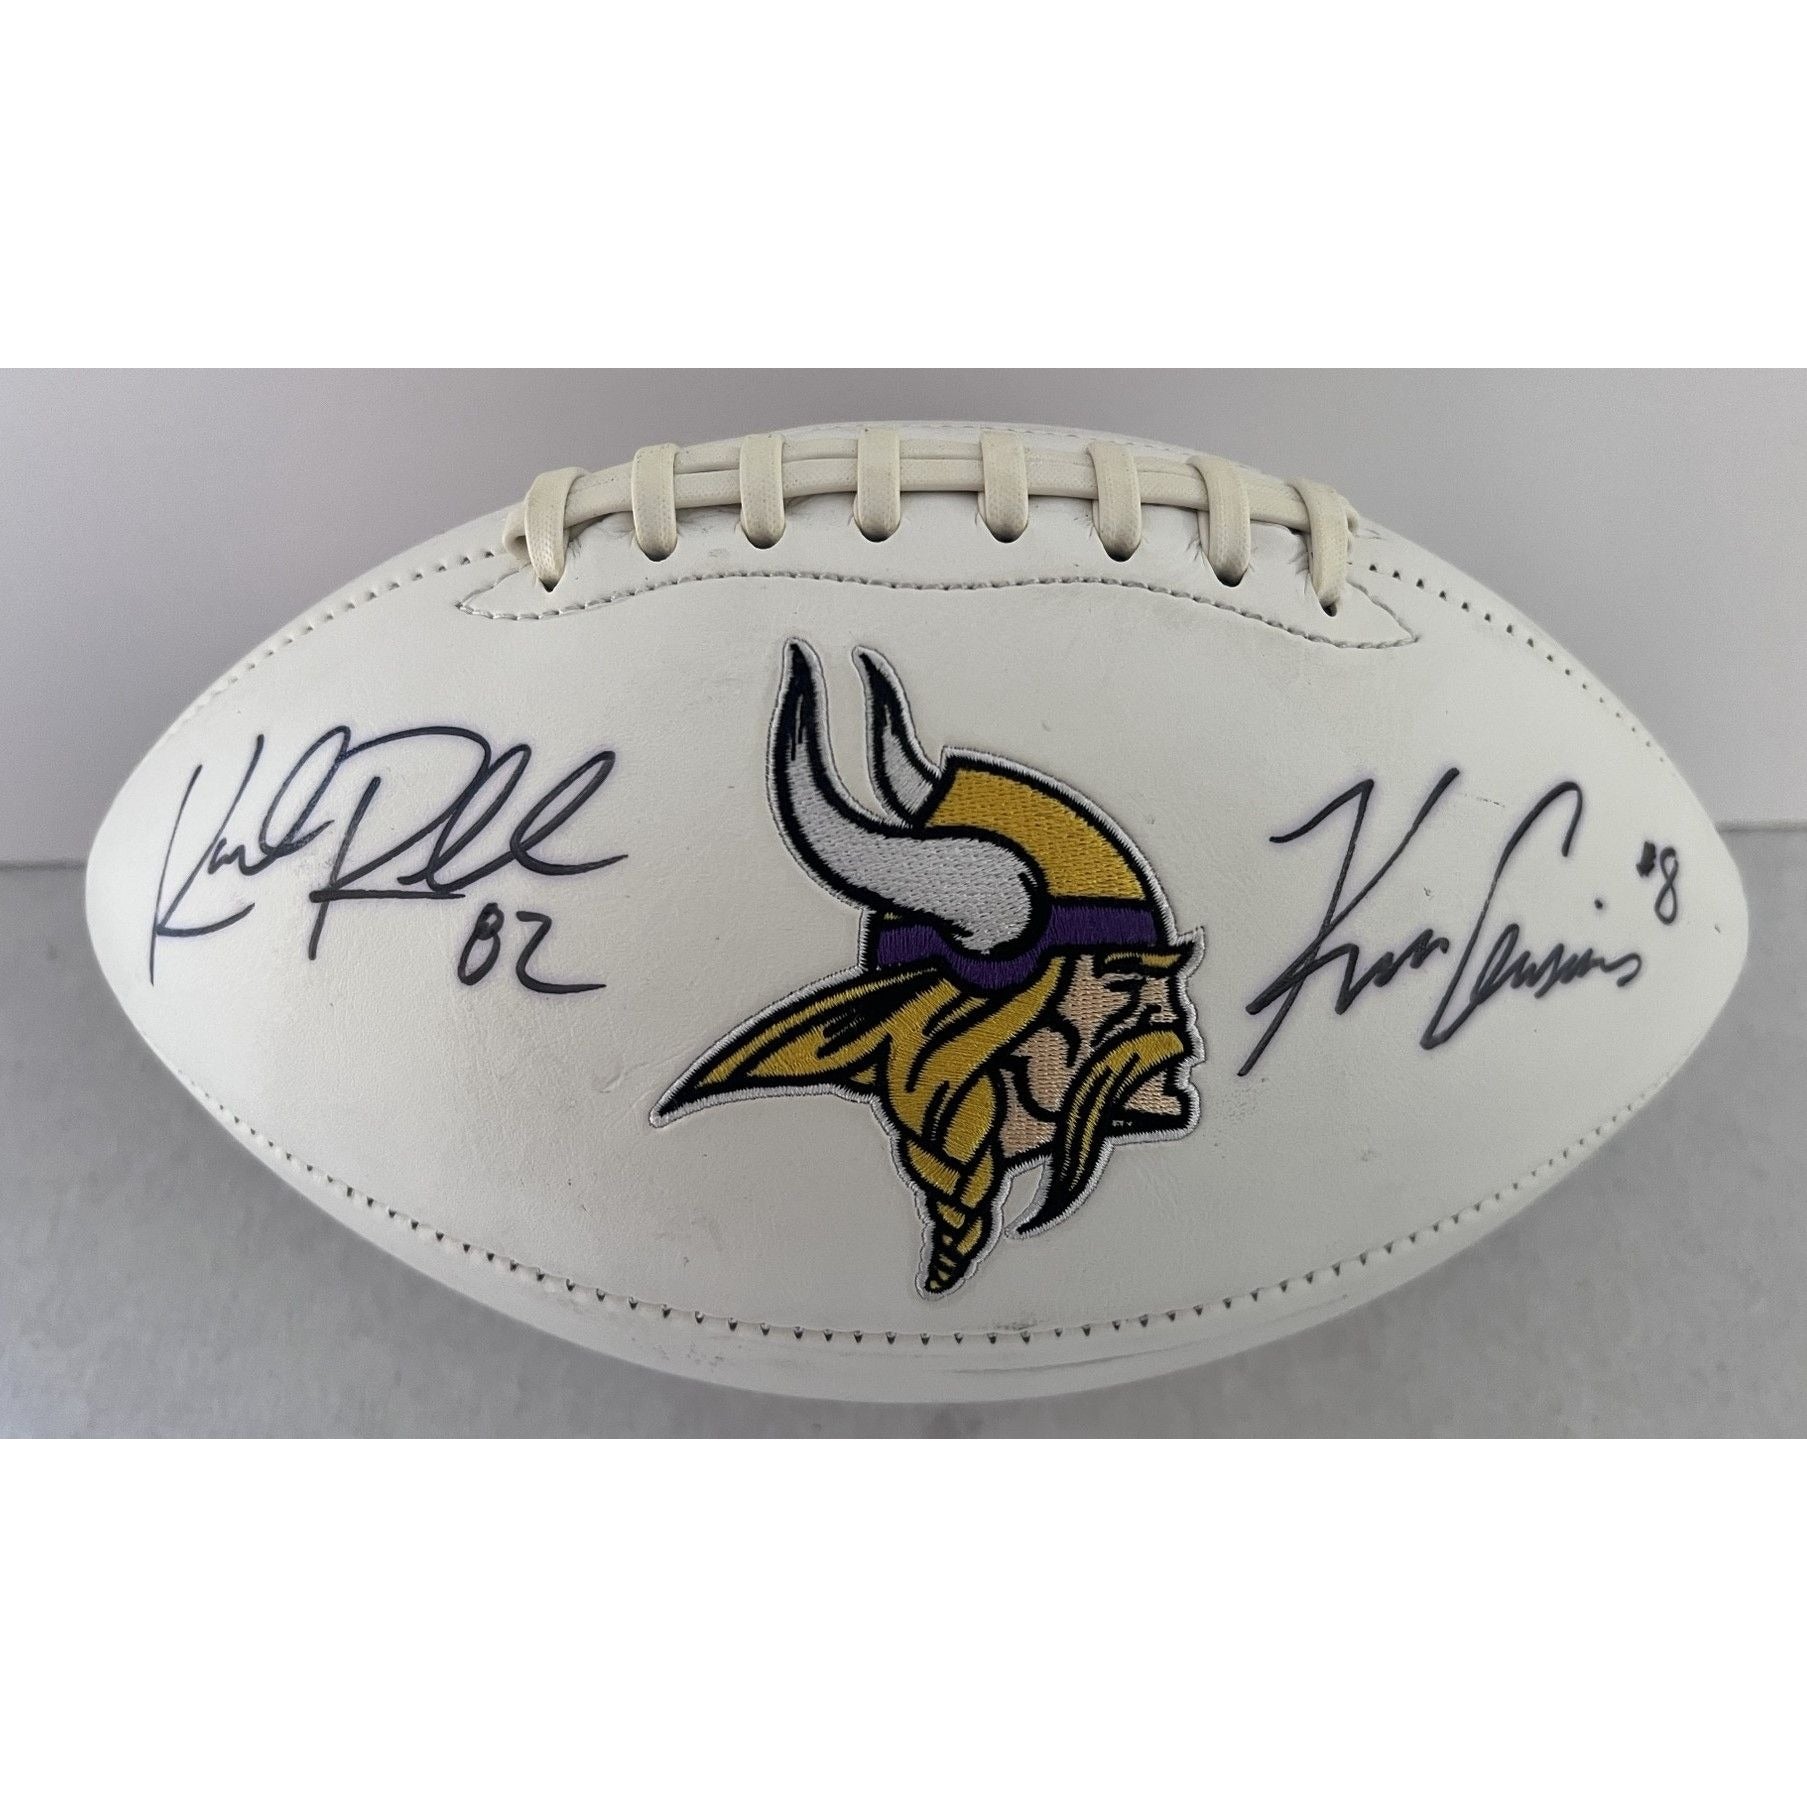 Minnesota Vikings Kirt Cousins and Kyle Rudolph full size logo football signed with proof